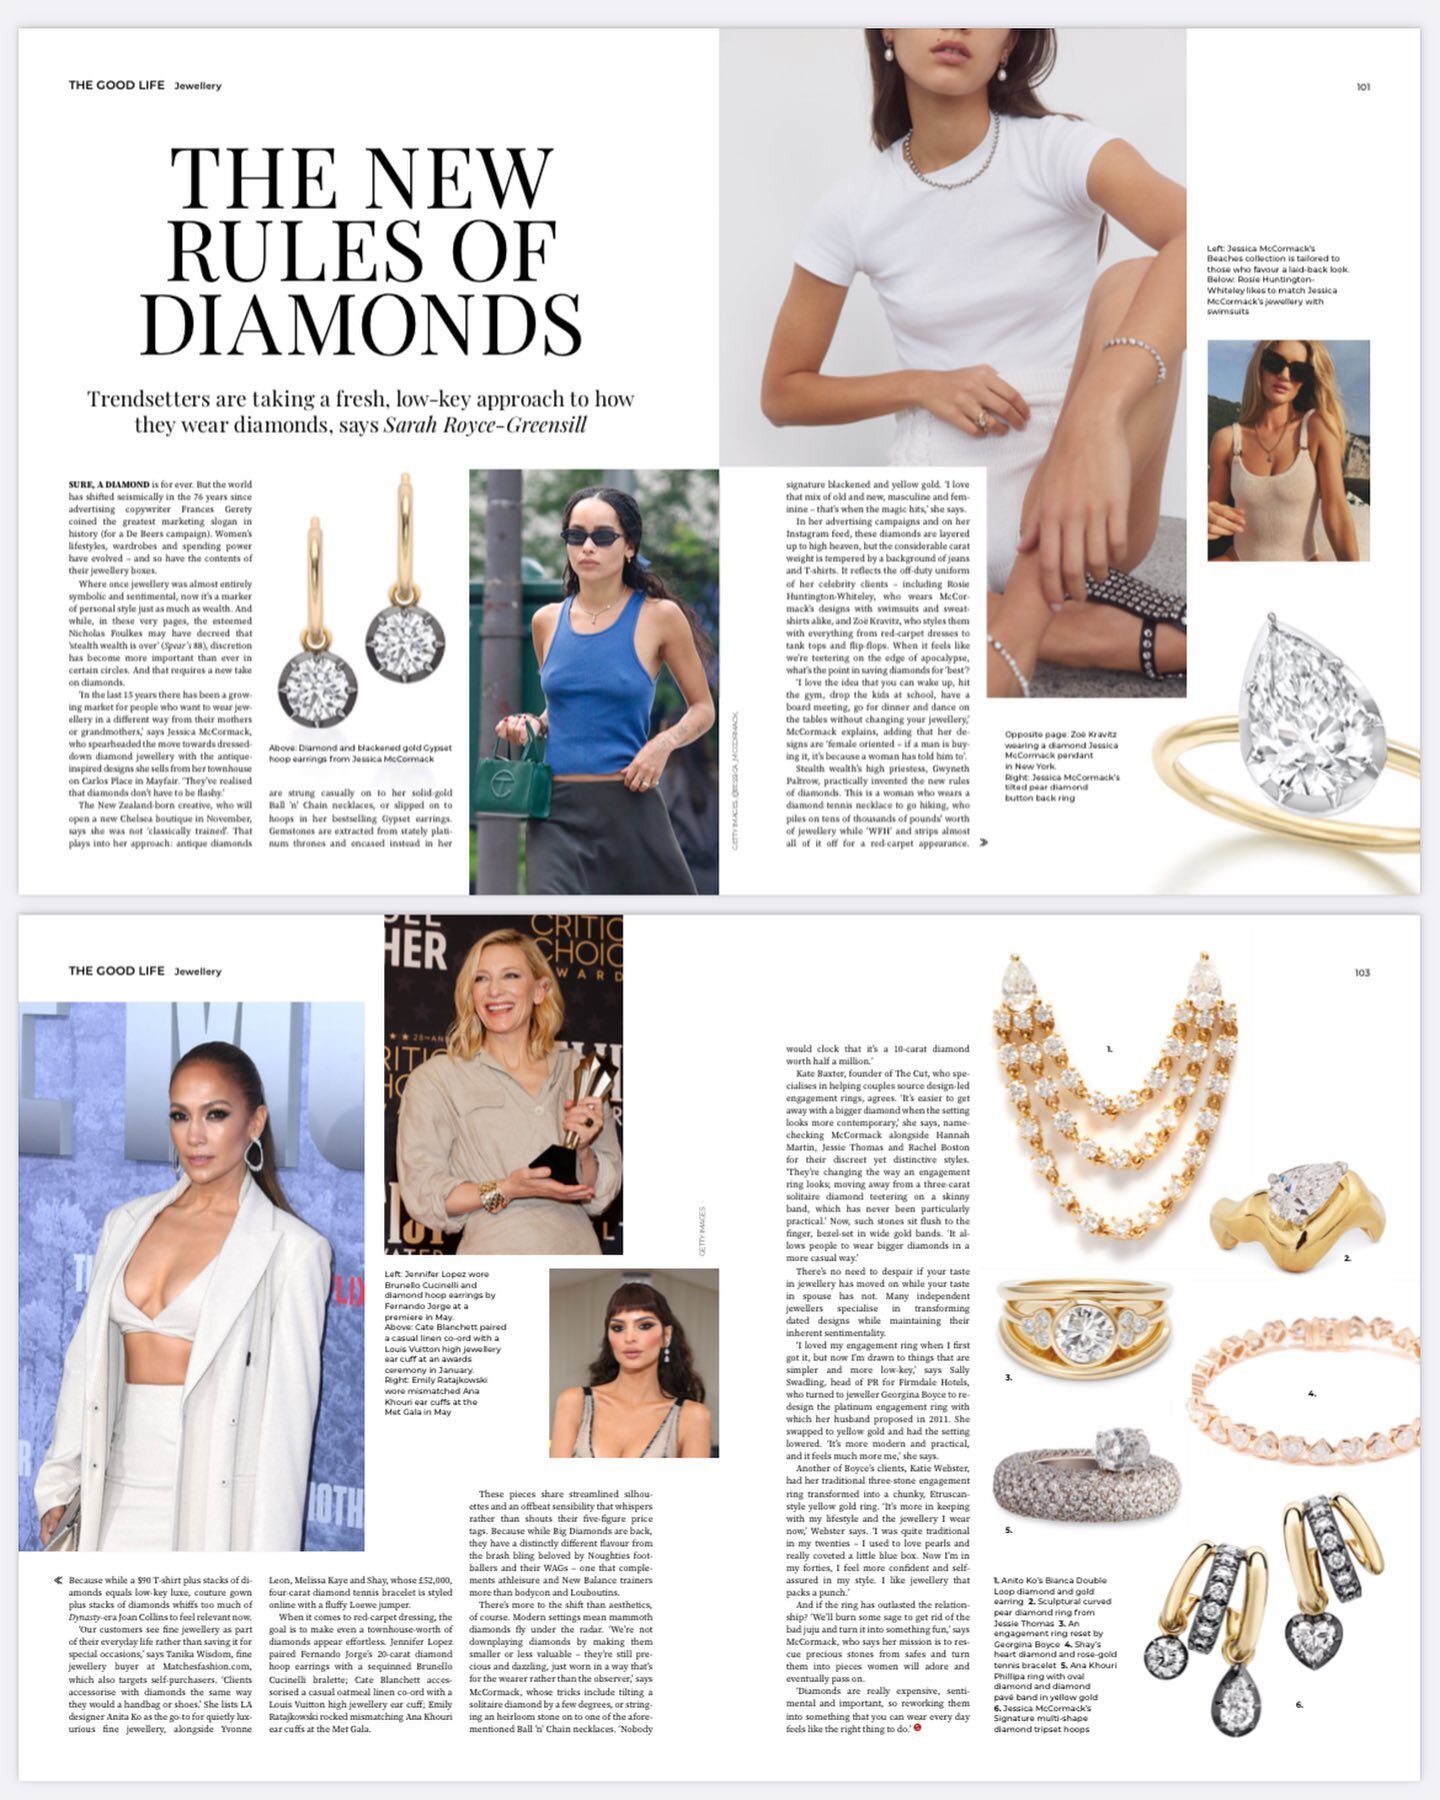 Thrilled to see GBFJ in @spearsmagazine thanks to the ever wonderful and brilliant @srgjewel - just the lift we needed rounded here!  My lovely clients talk about ring renovation, restoration and revamping.  Have a read xx 💎 #editiorial #spearsmagaz